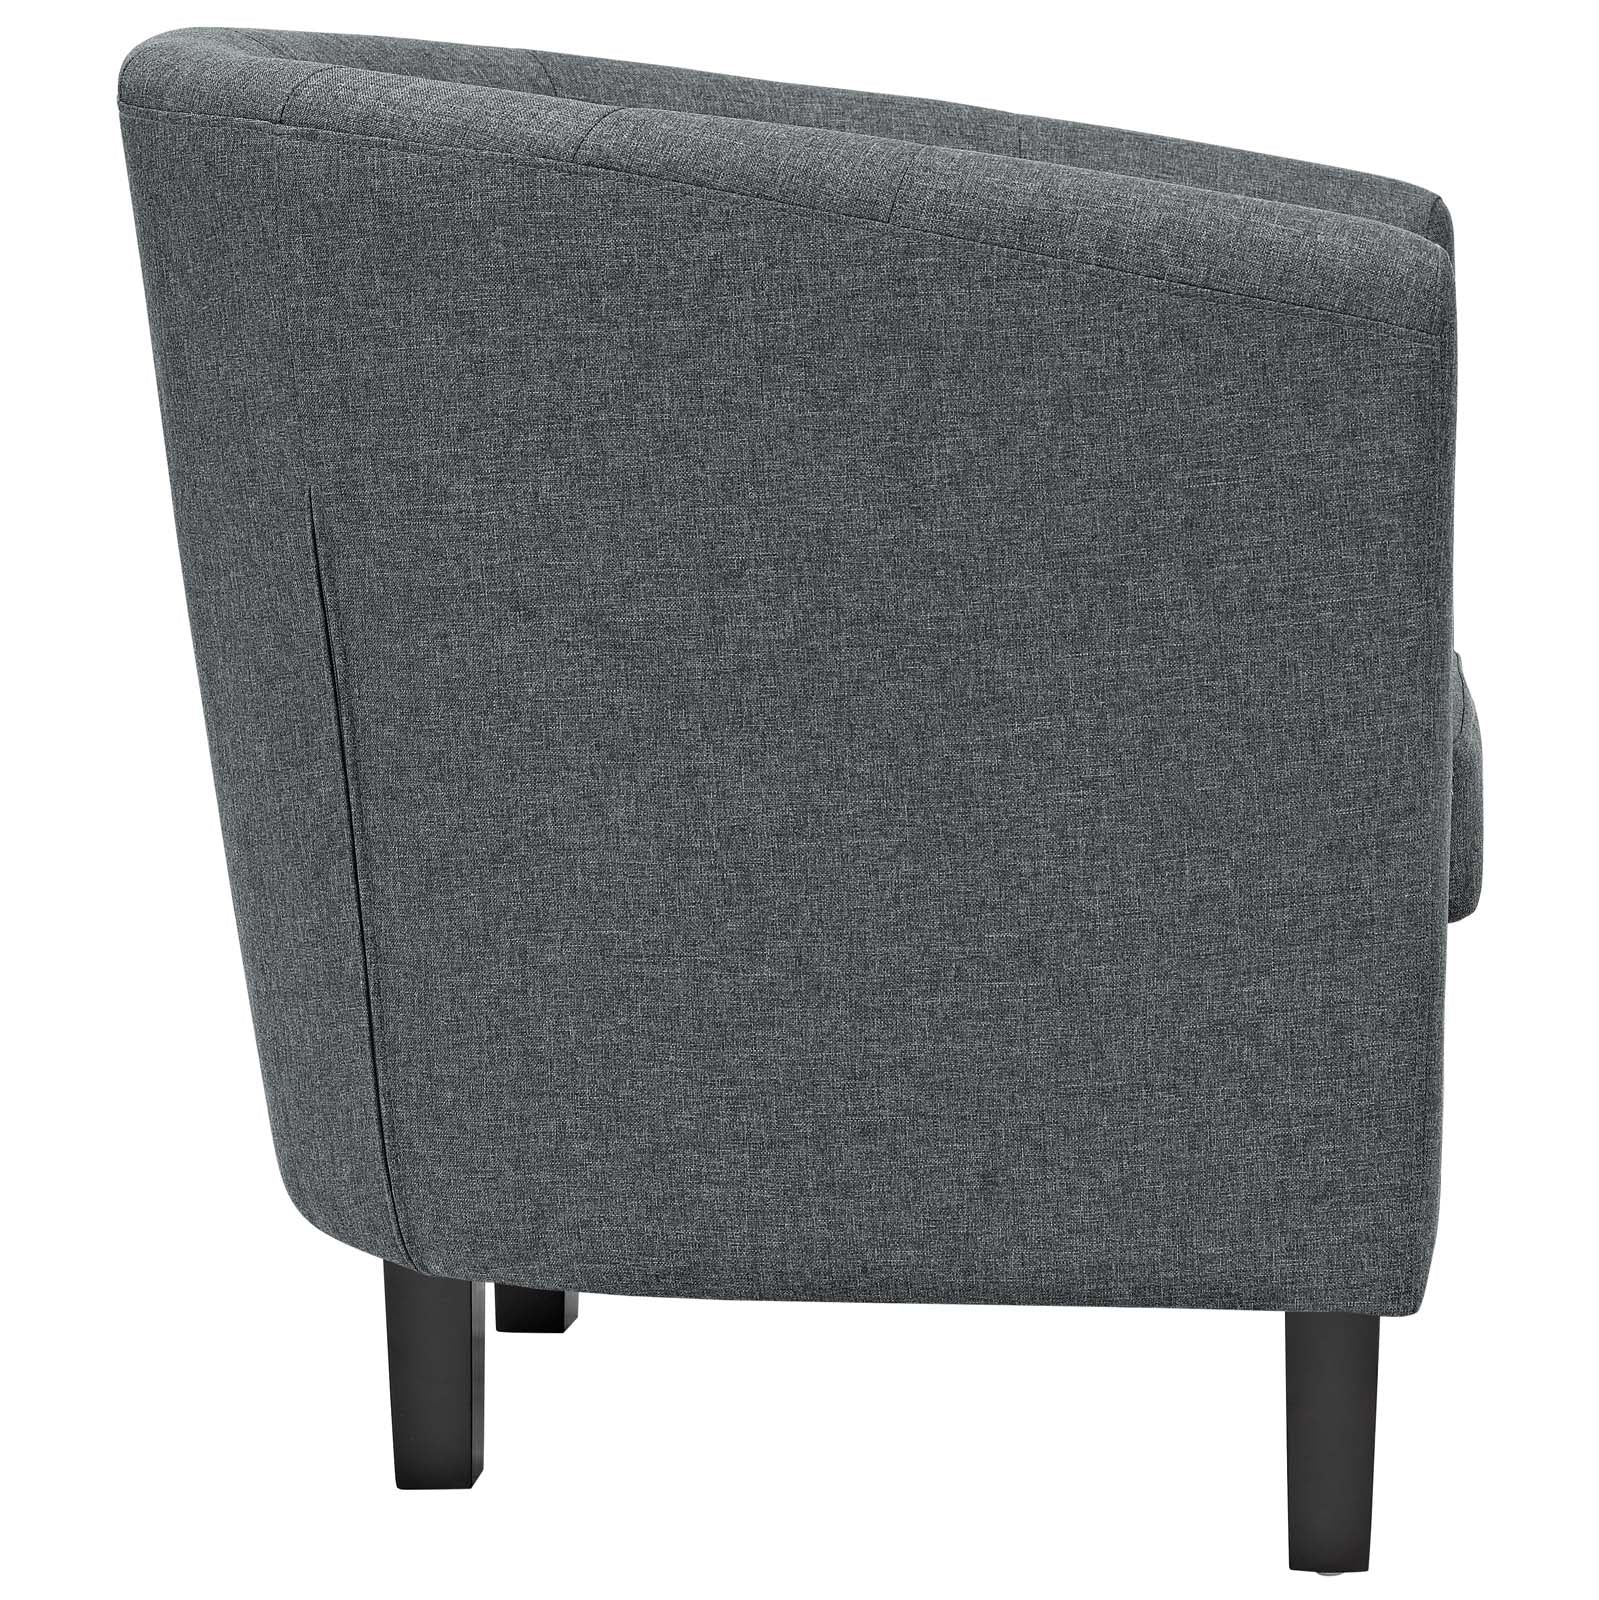 Modway Accent Chairs - Prospect 2 Piece Upholstered Fabric Armchair Set Gray